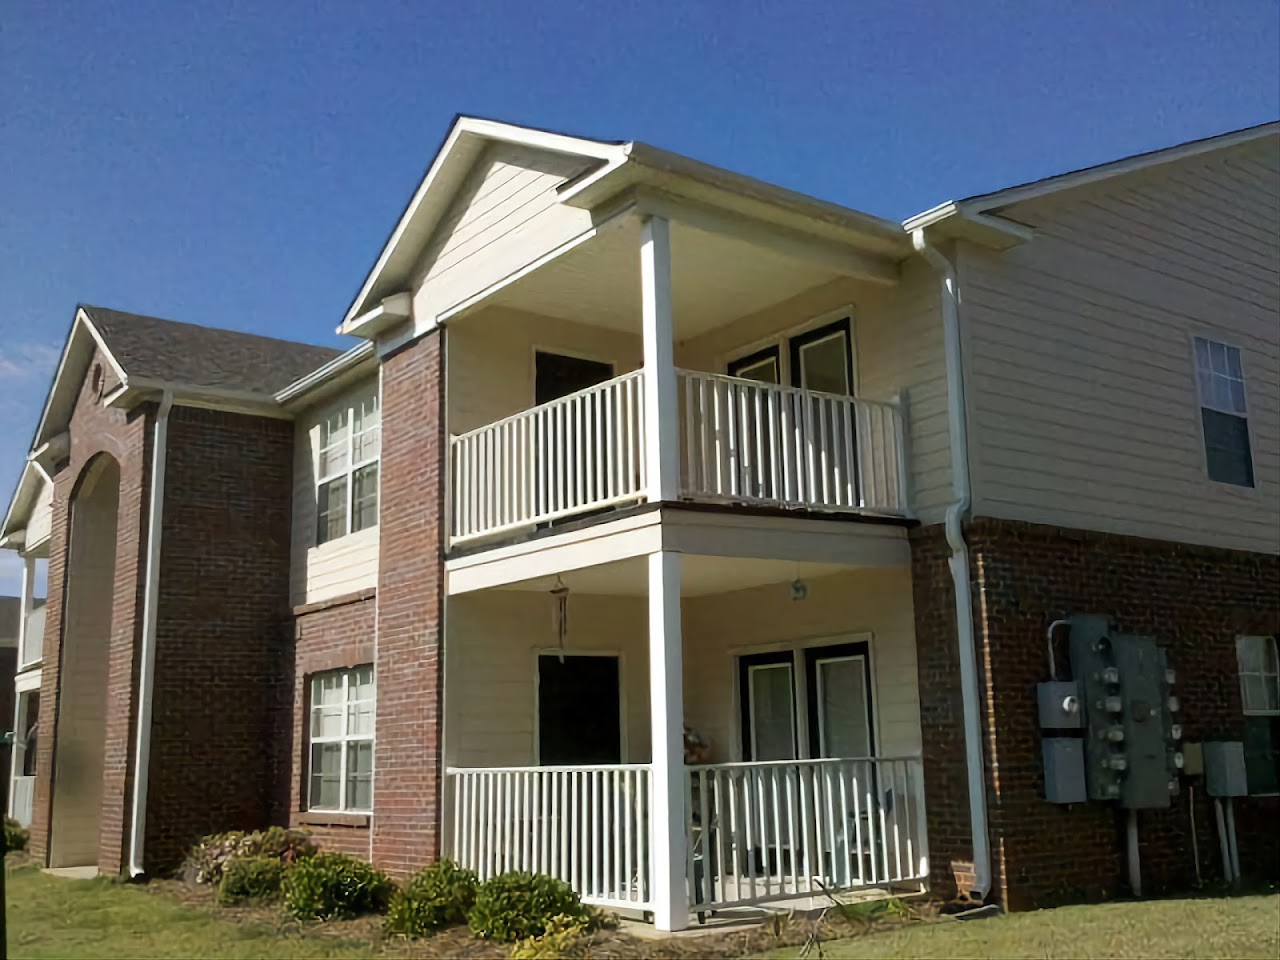 Photo of HERON COVE APTS II. Affordable housing located at 630 GLOVER AVE ENTERPRISE, AL 36330